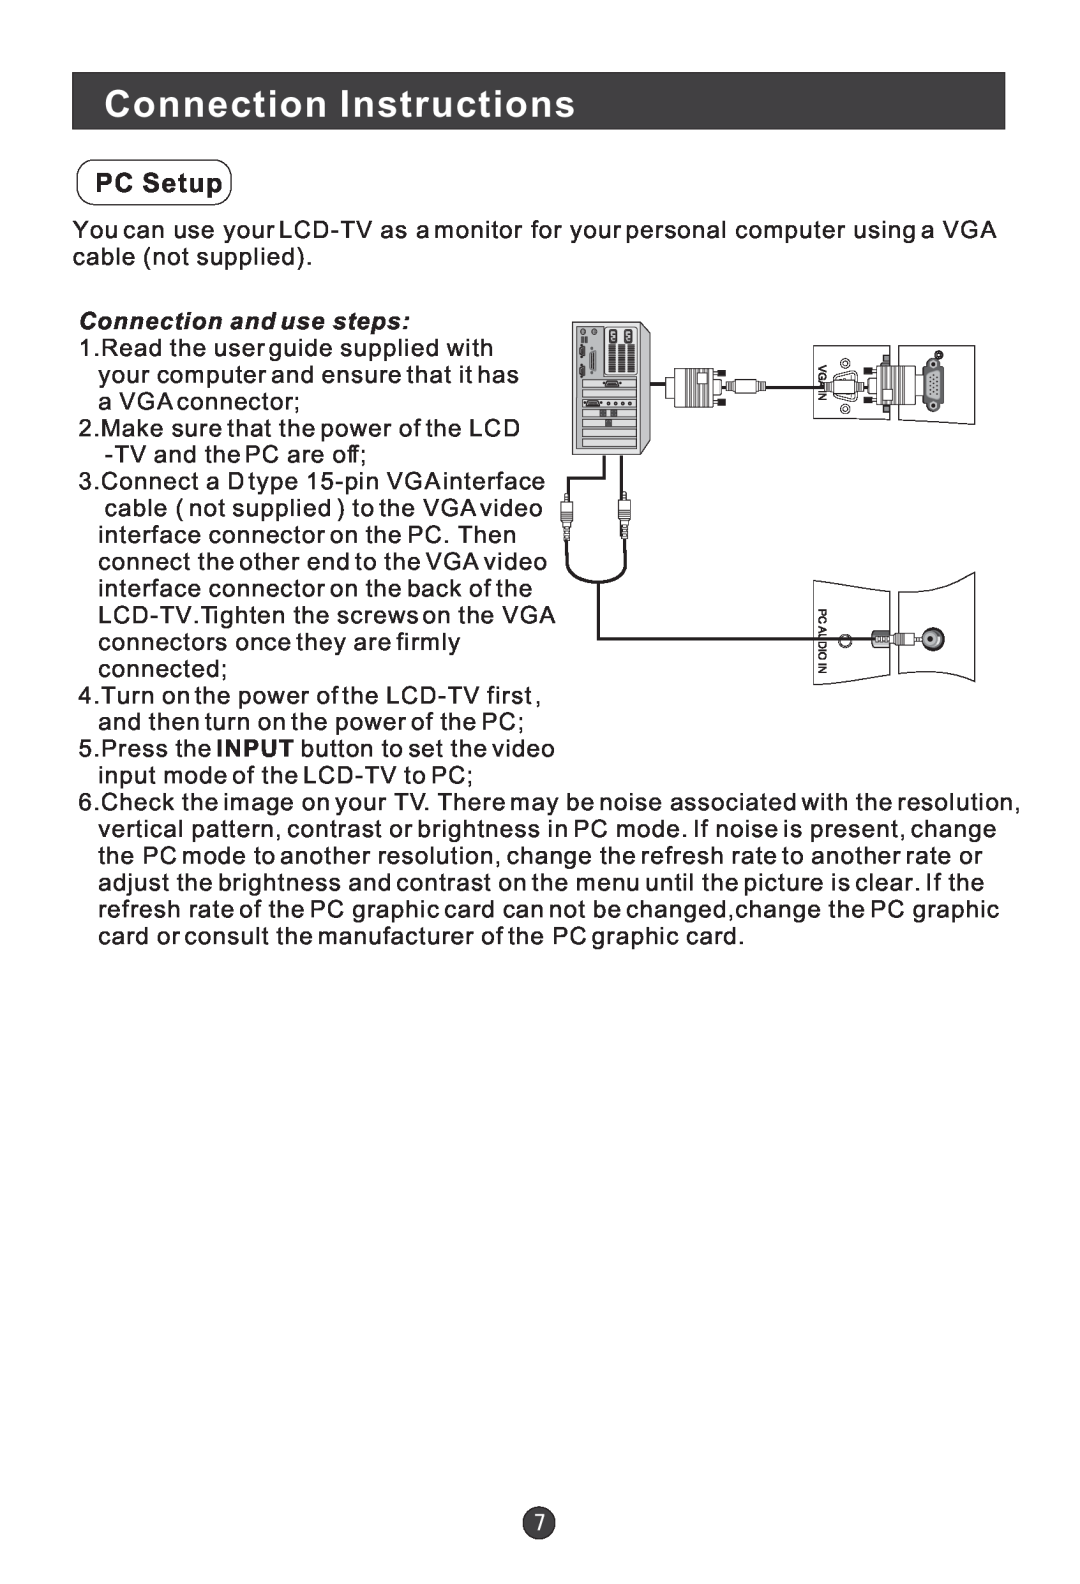 Haier HL15E, HL19W, HL22E, HL19E, L15B user manual Connection Instructions, PC Setup, Connection and use steps 